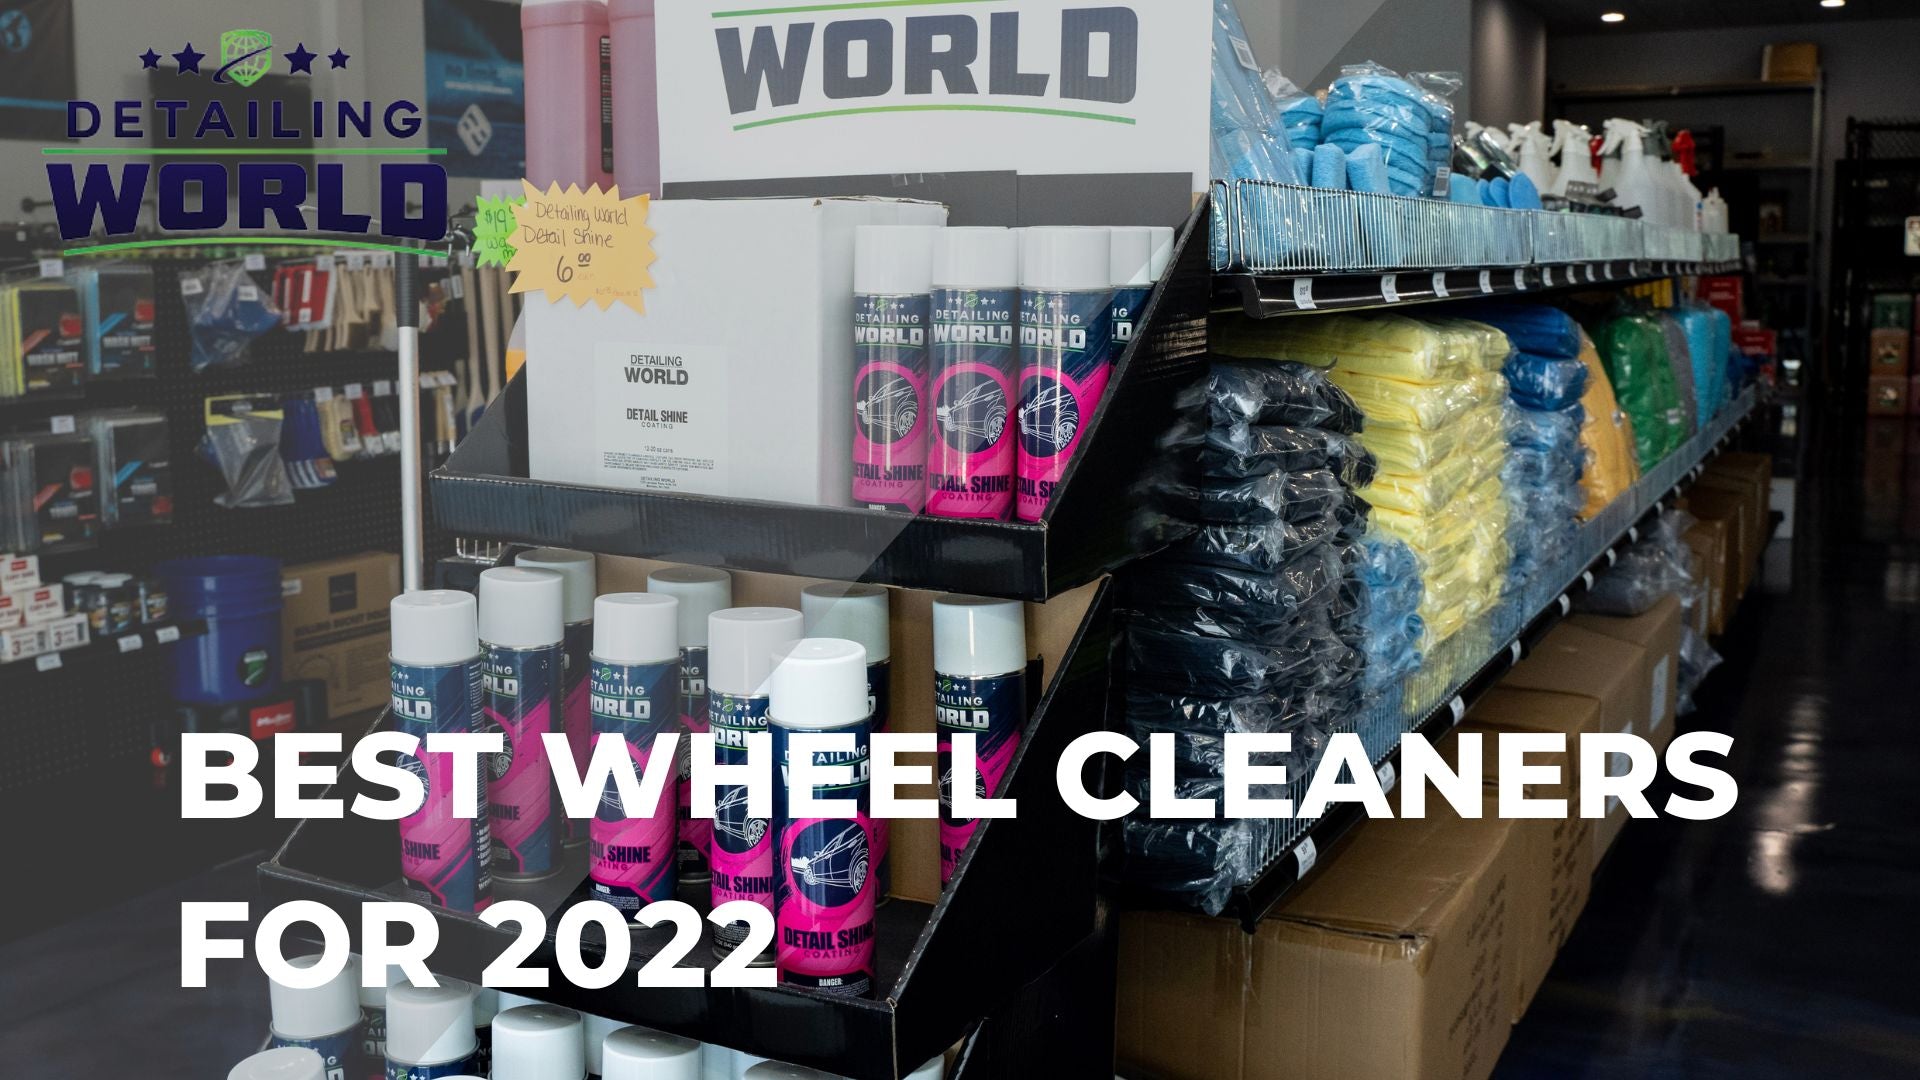 Best Wheel Cleaners For 2022 - Detailing World